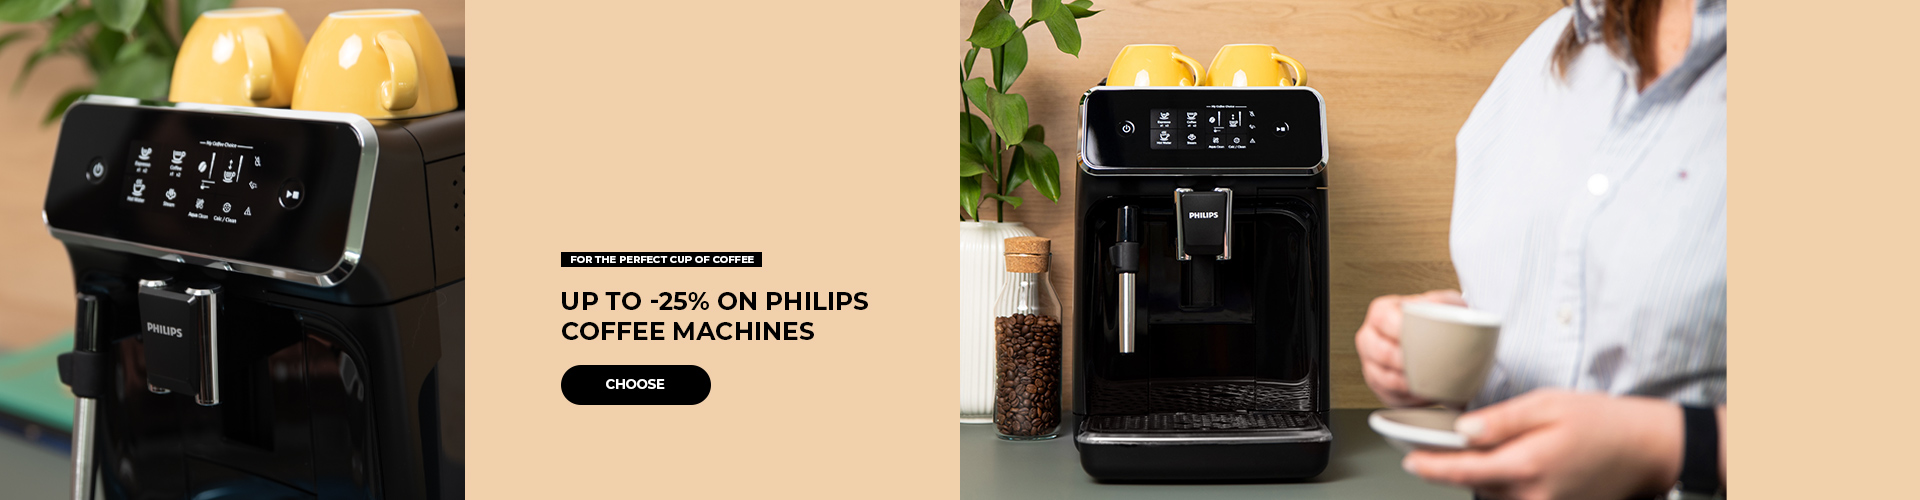 Up to -25% on PHILIPS coffee machines